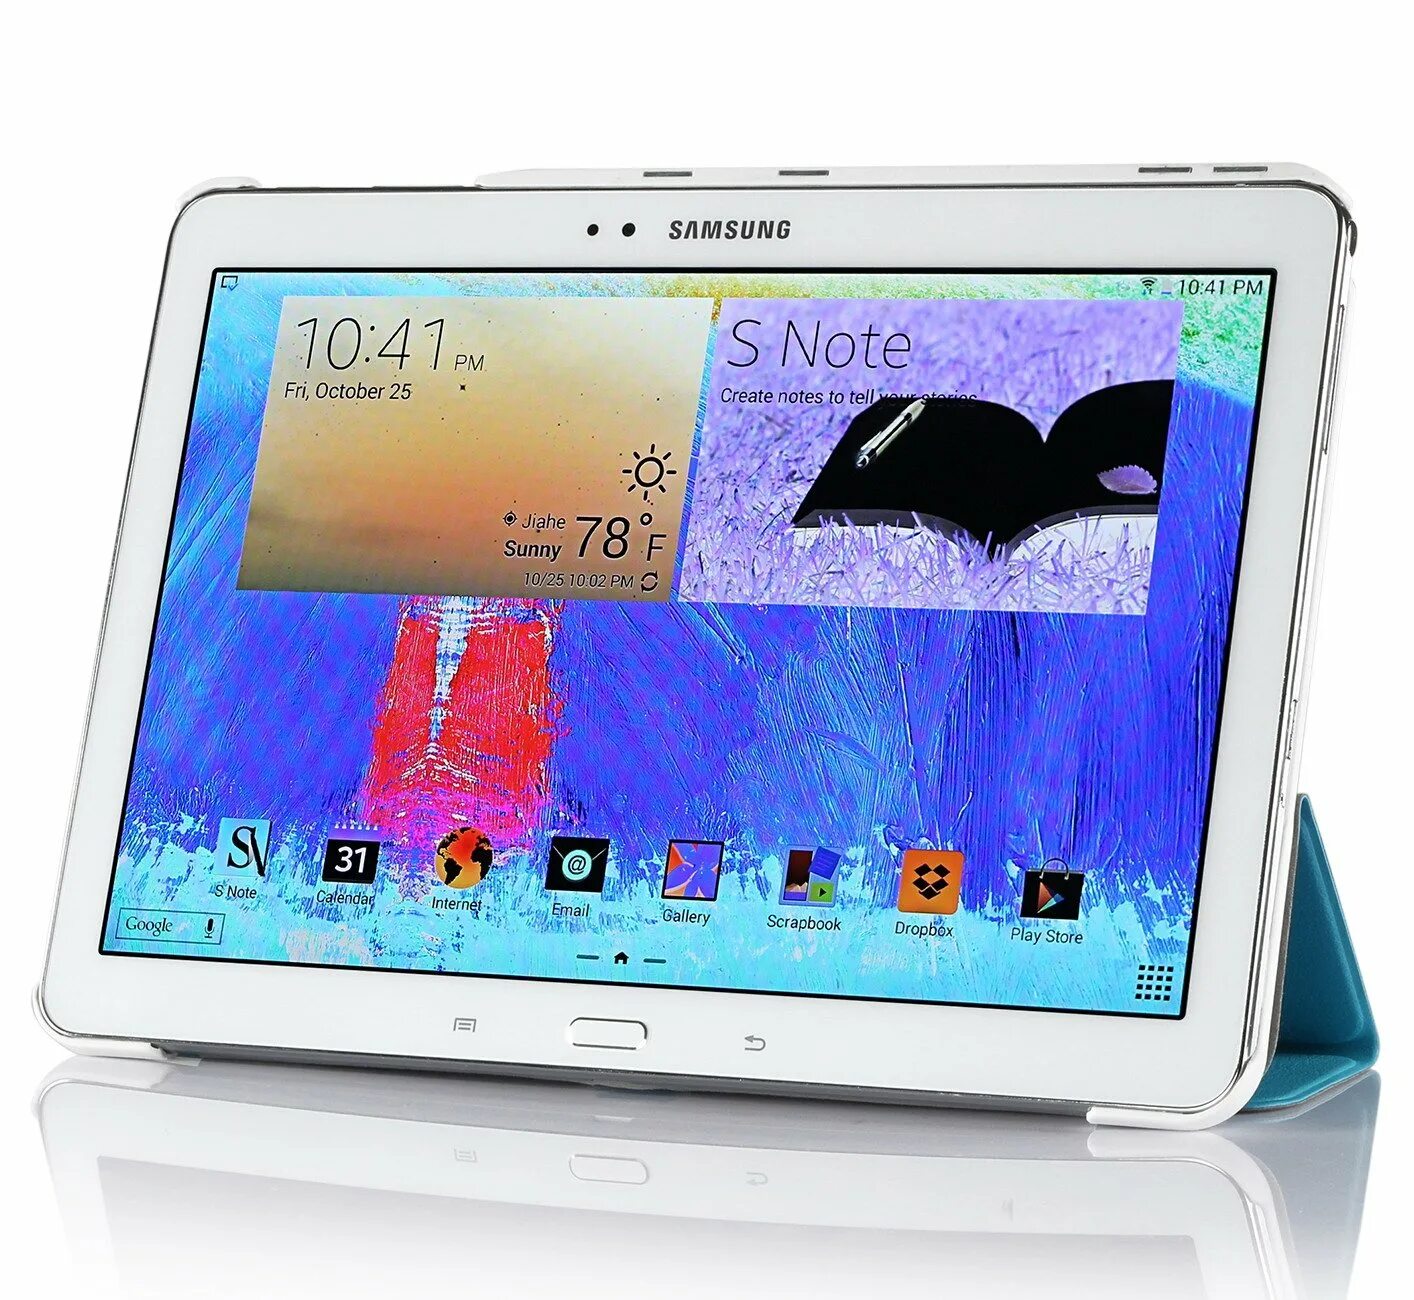 Samsung Galaxy Note Pro 12. Samsung Galaxy Note Pro 12.2. Samsung Galaxy Note 12 планшет. Samsung Galaxy Note p5200.